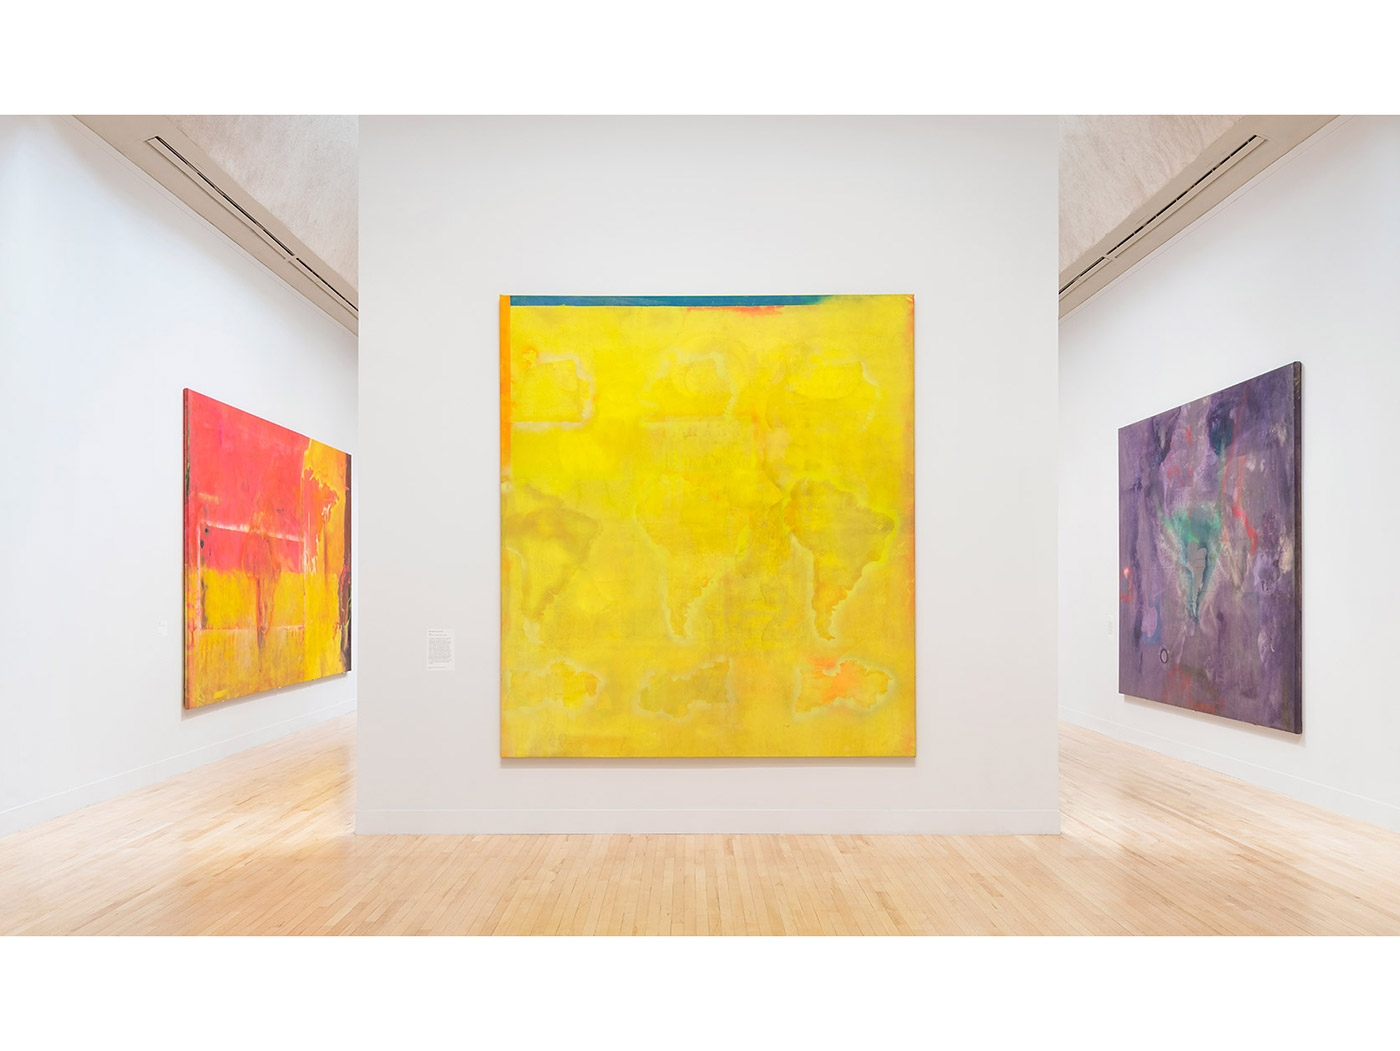 Installation View, Frank Bowling's major exhibition at Tate Britain, London (2019)